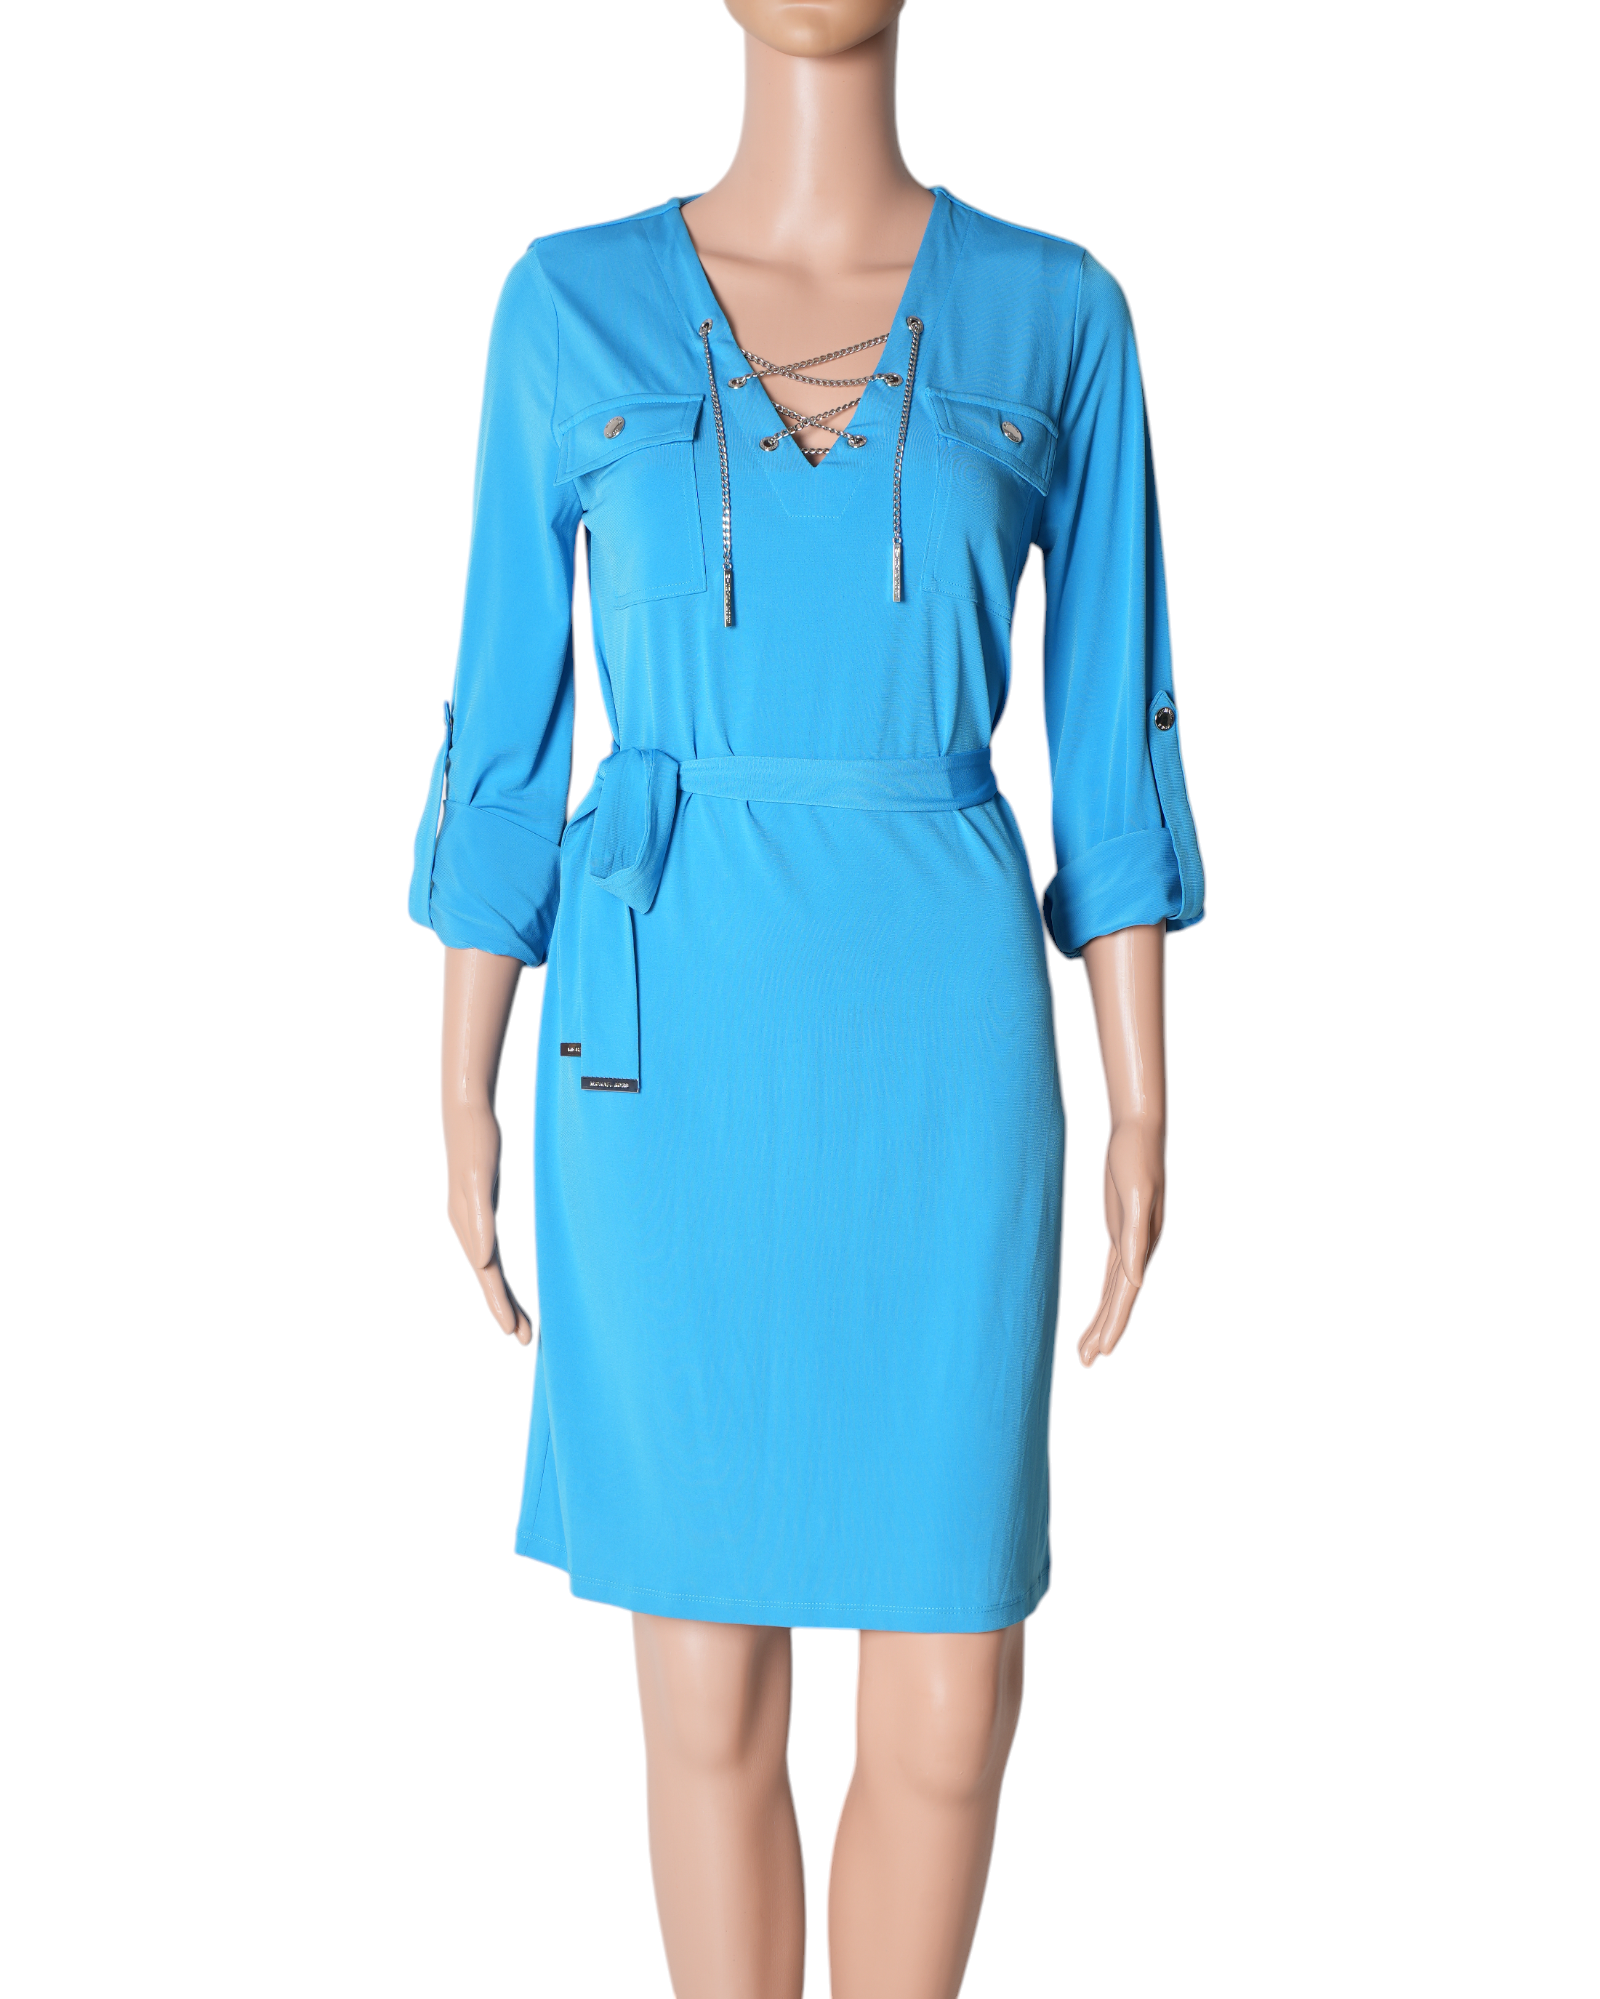 Michael Kors Blue V Neck Tunic With SIlver Chain Detailing